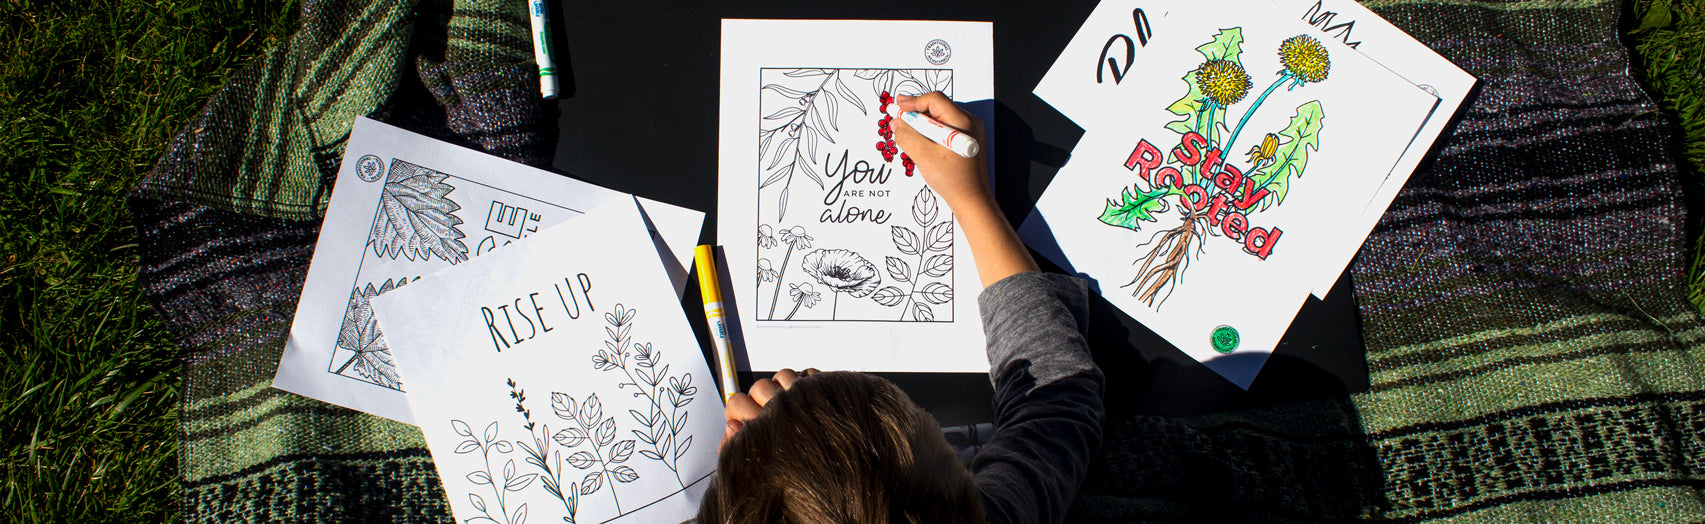 Child coloring in nature-inspired coloring book sheets